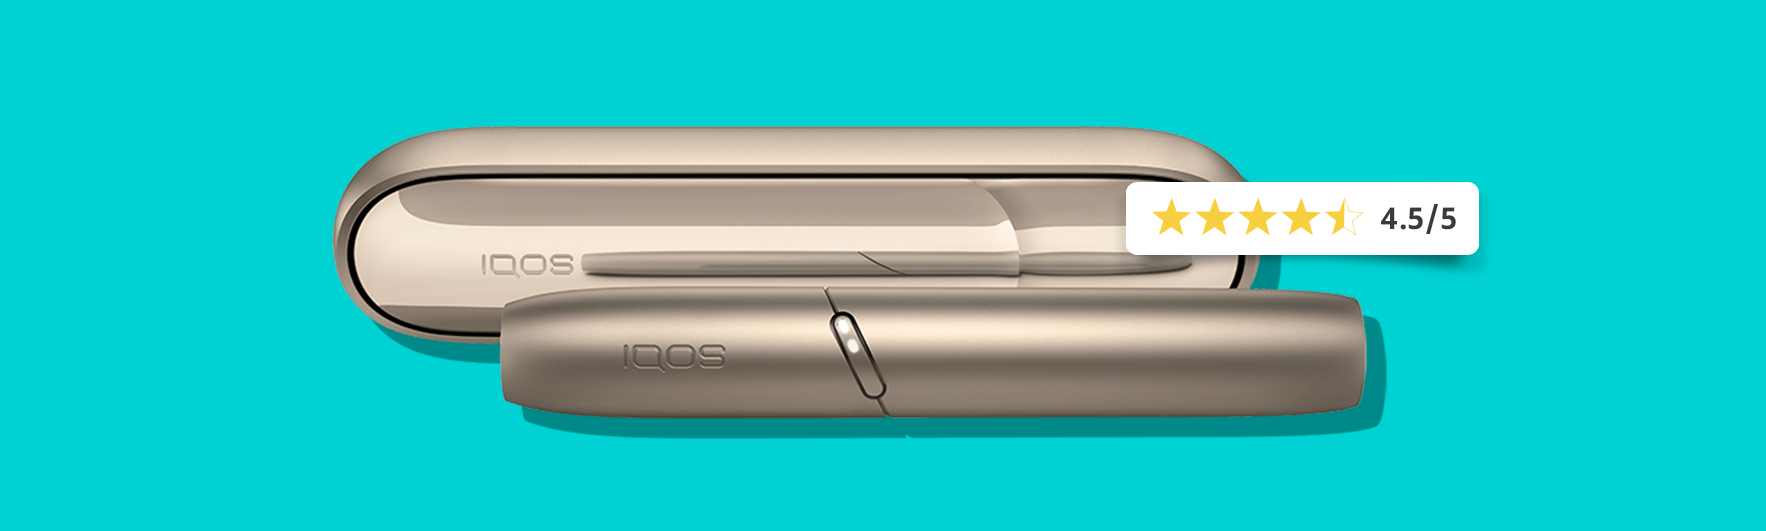 iqos reviews and ratings